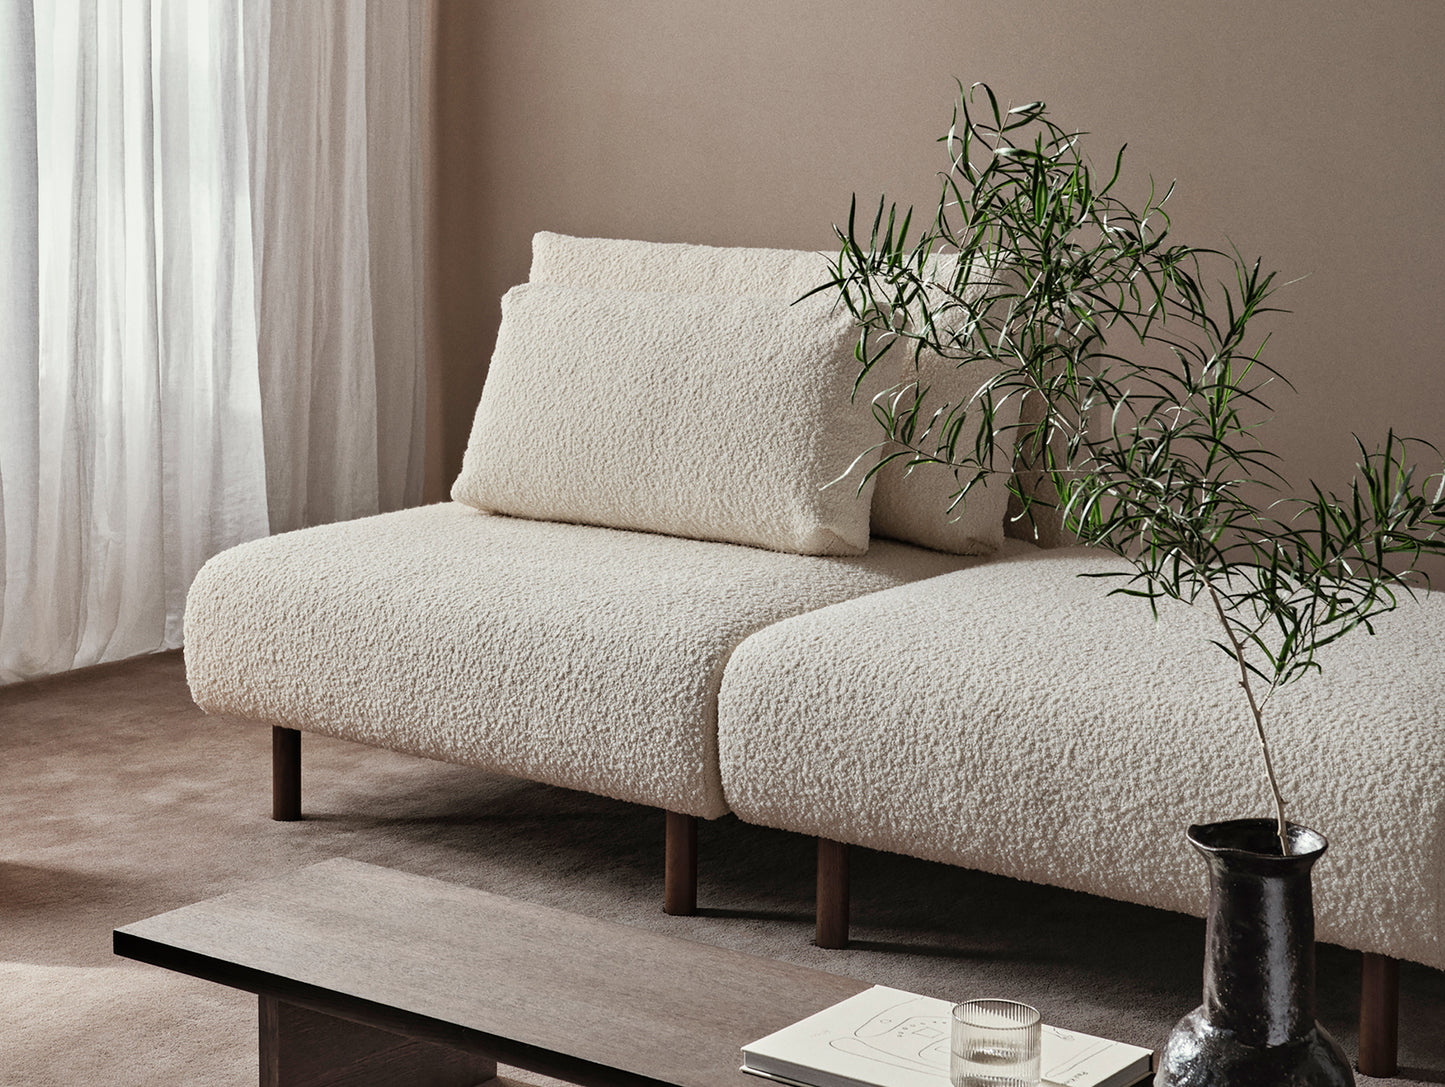 Dase 2-Seater Modular Sofa by Ferm Living - Nordic Boucle Natural